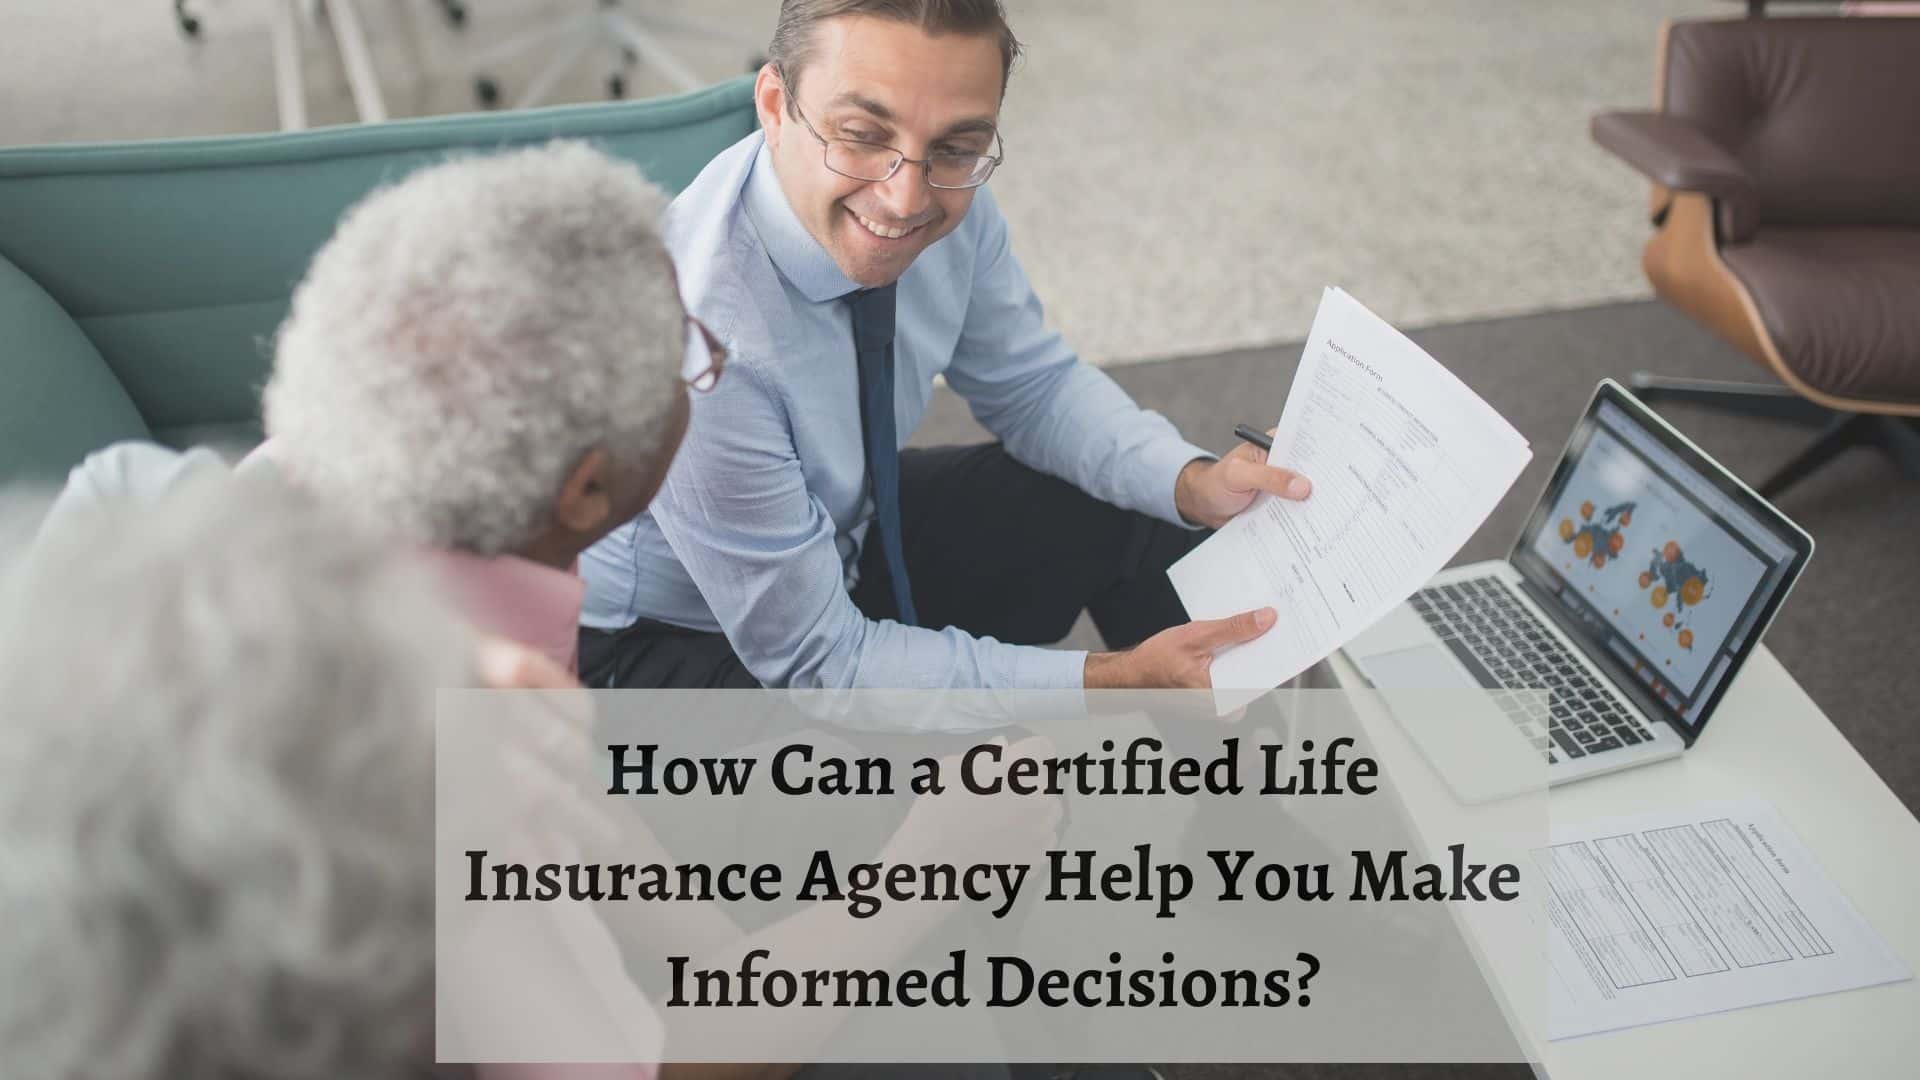 Choose a Certified Life Insurance Agency to Make Informed Decisions